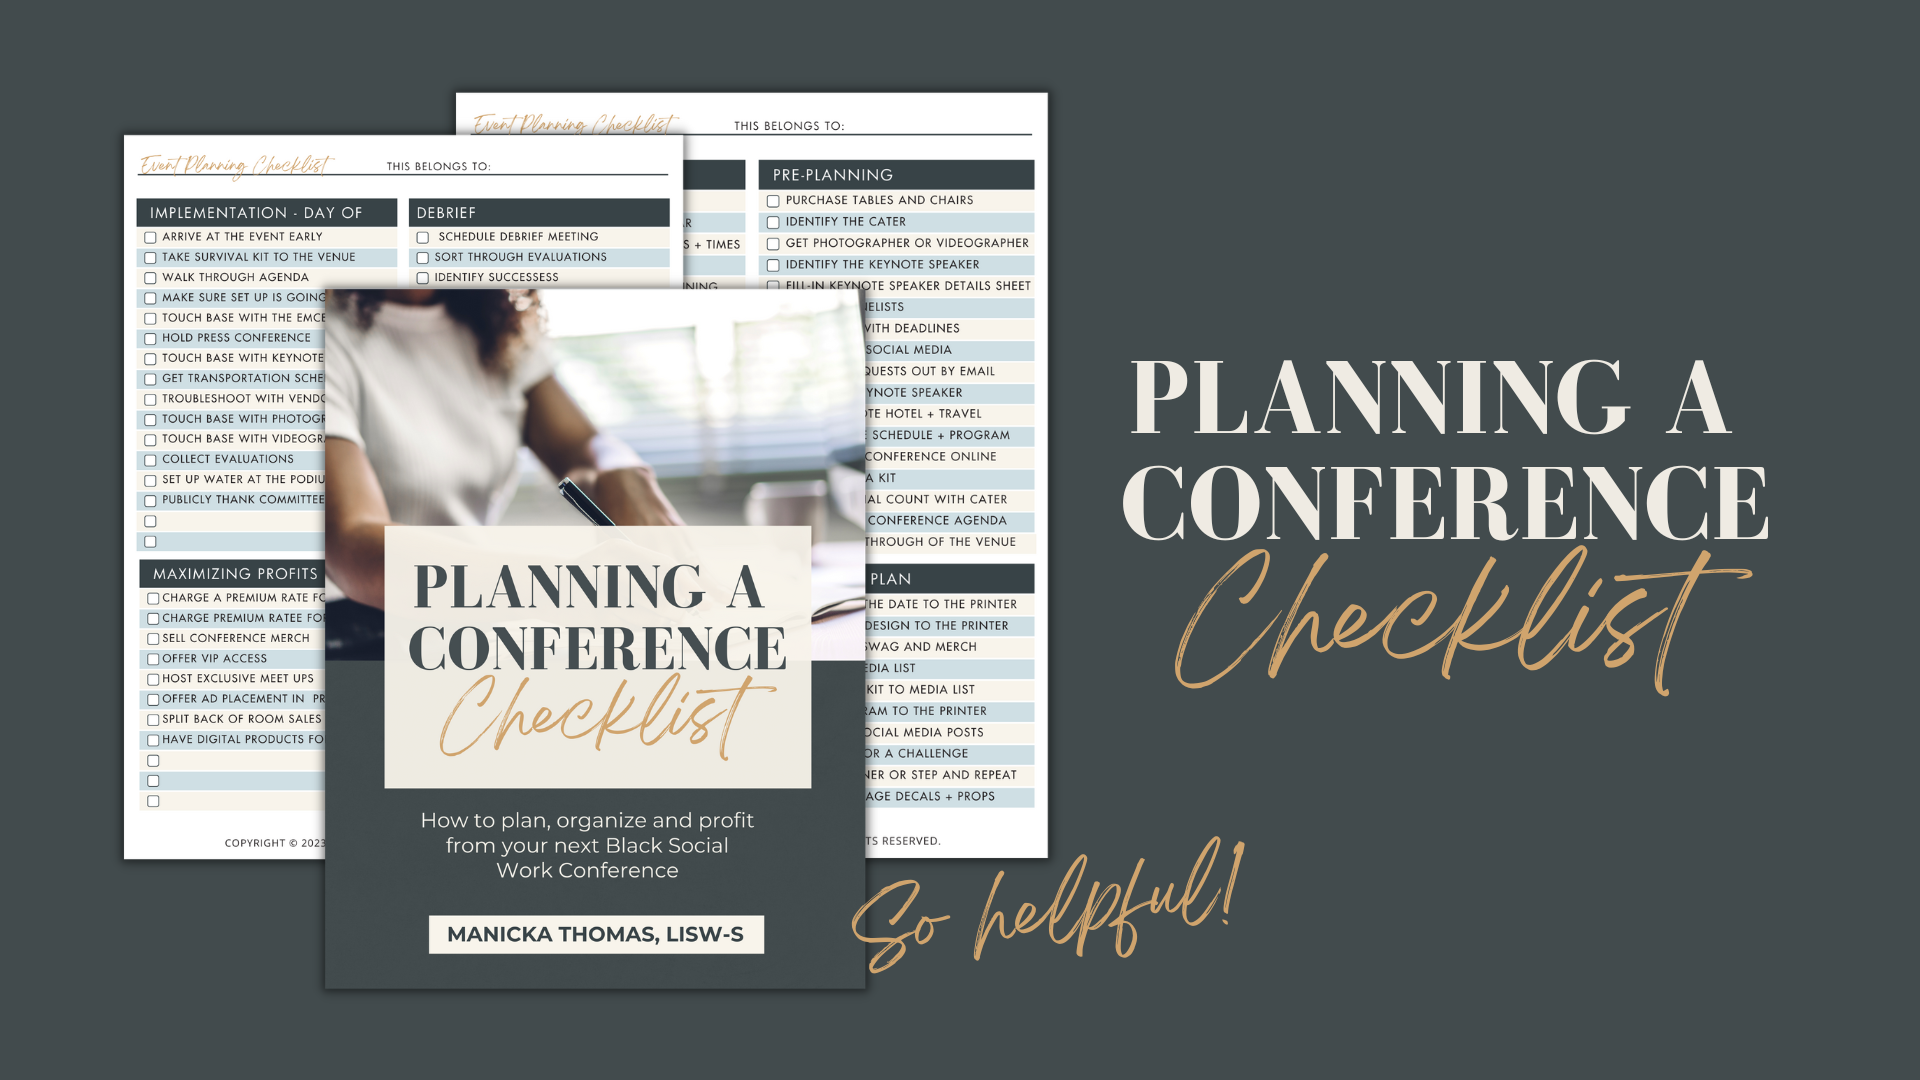 Ultimate Planning a Conference Guide: Organizing a Successful Black Social Work Conference